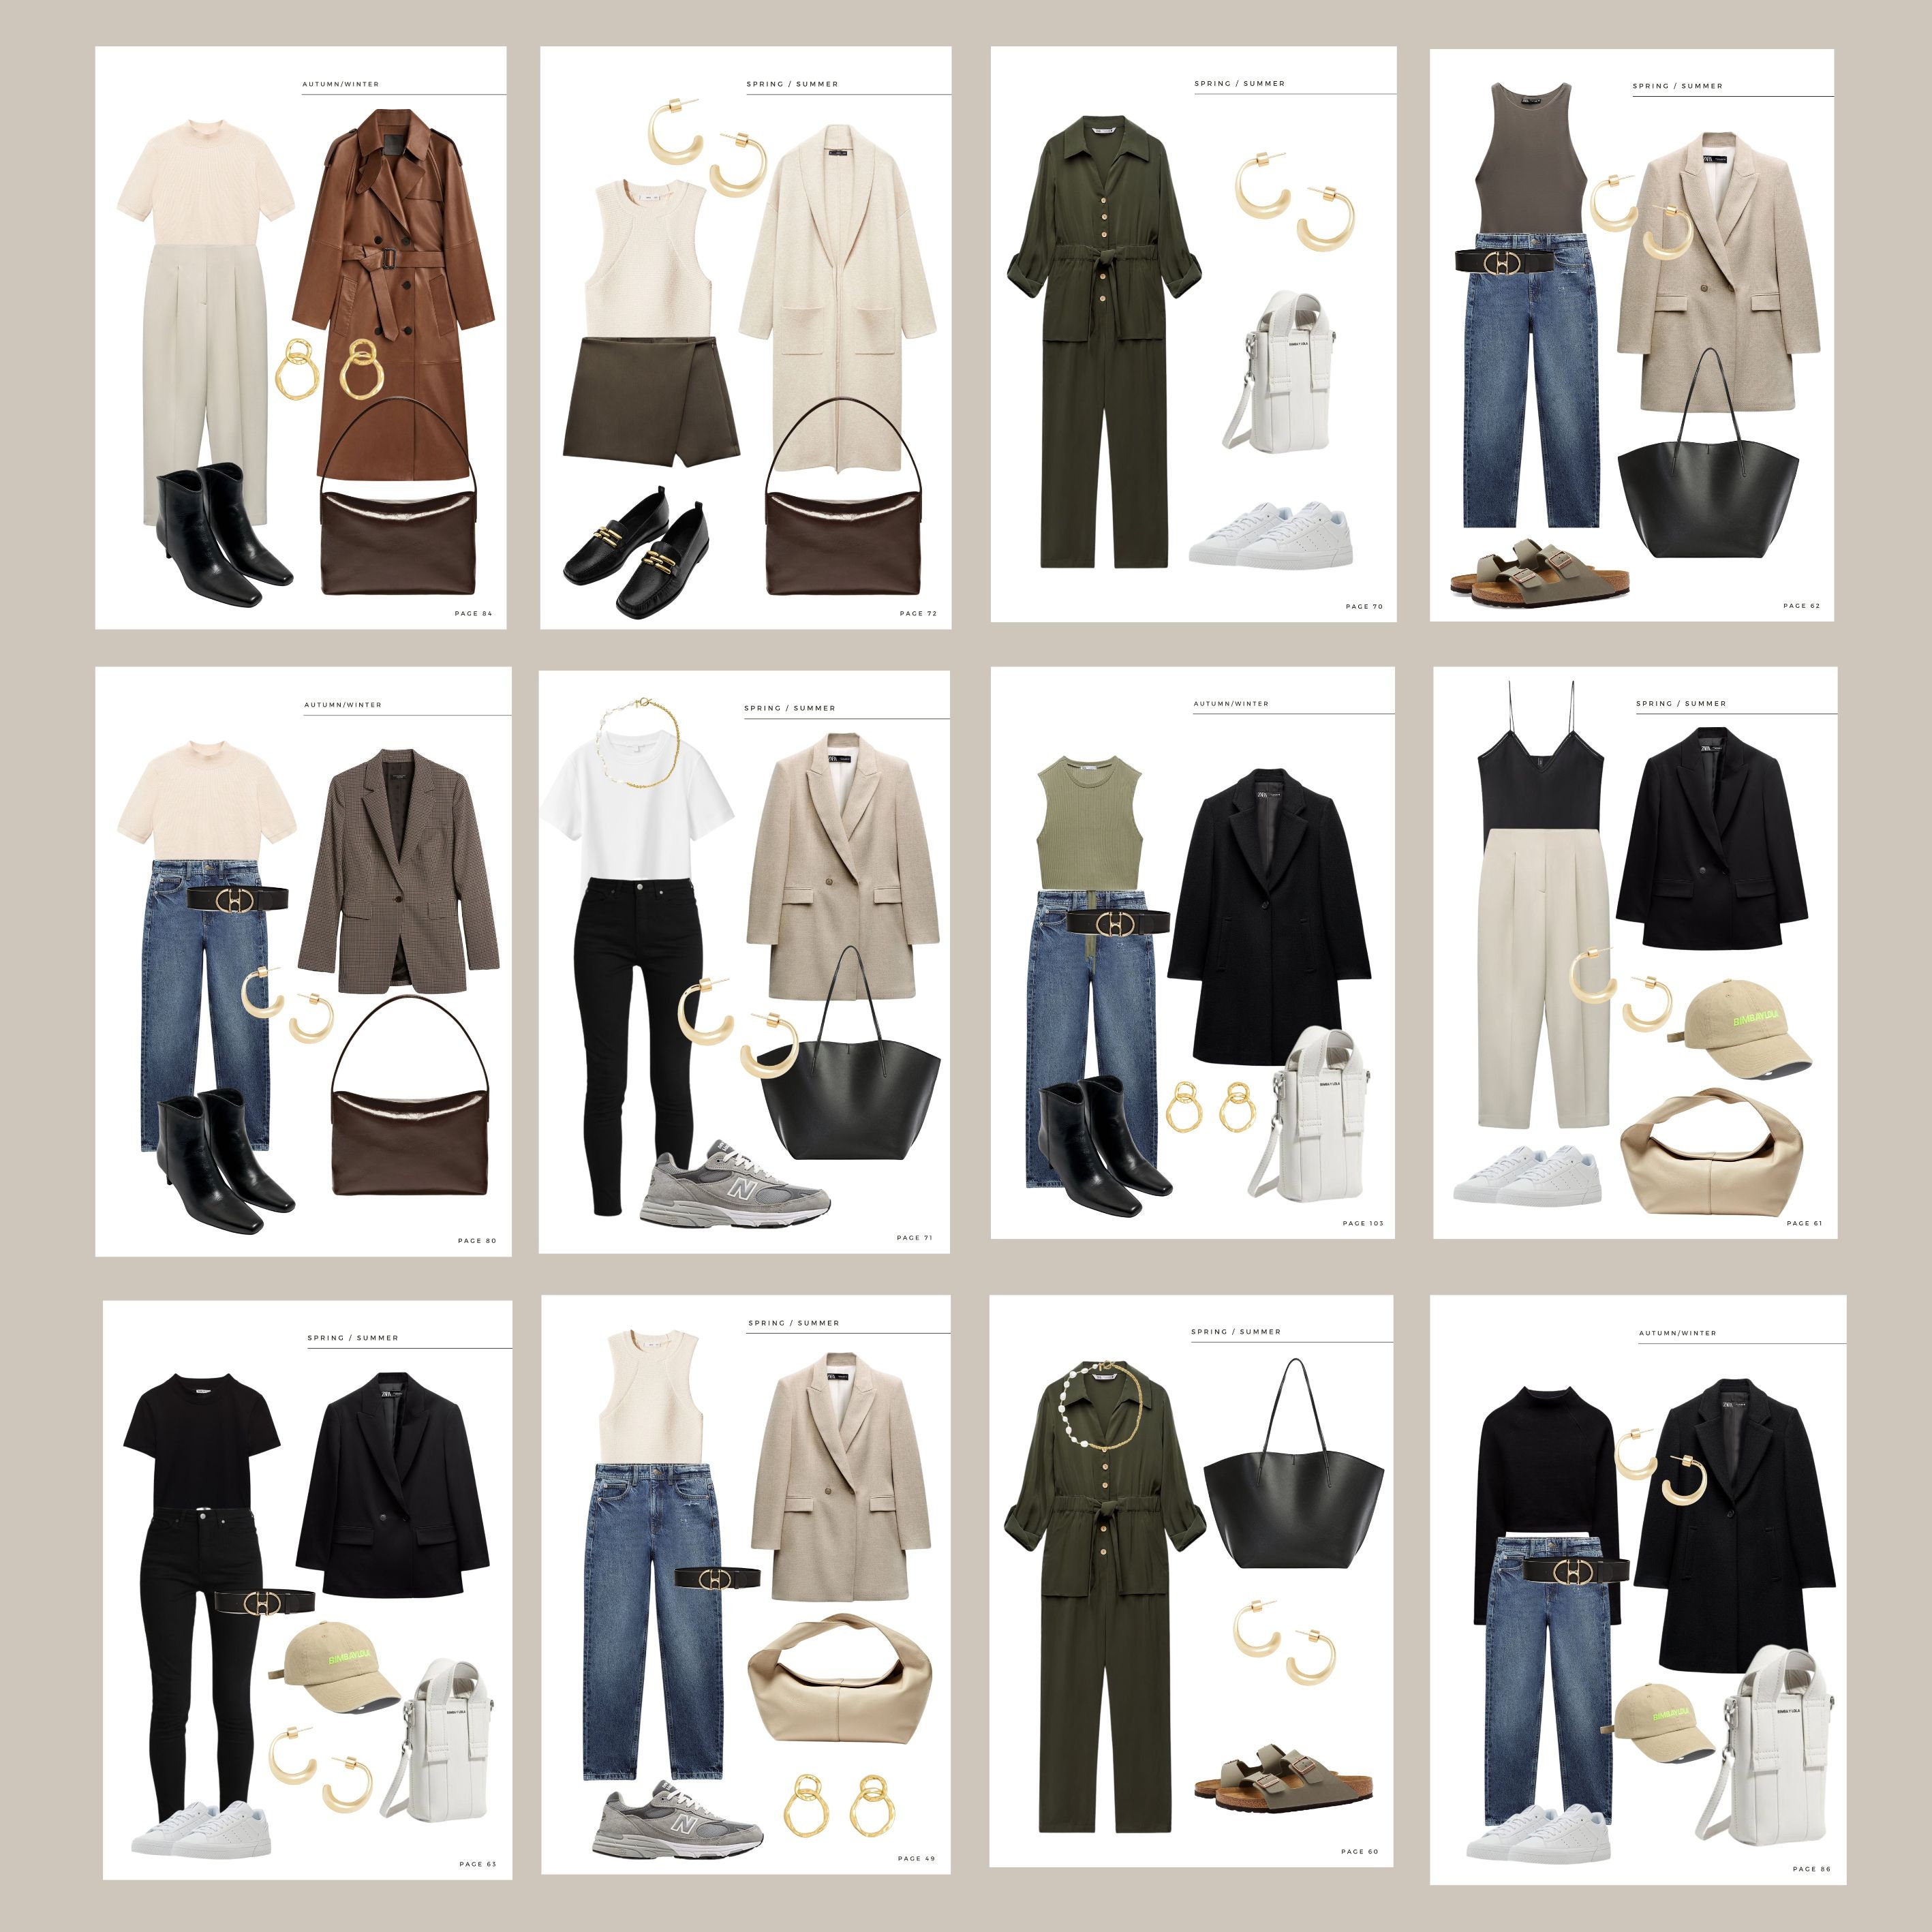 70 Capsule Wardrobe Clothing Outfit Combinations for Women Digital ...